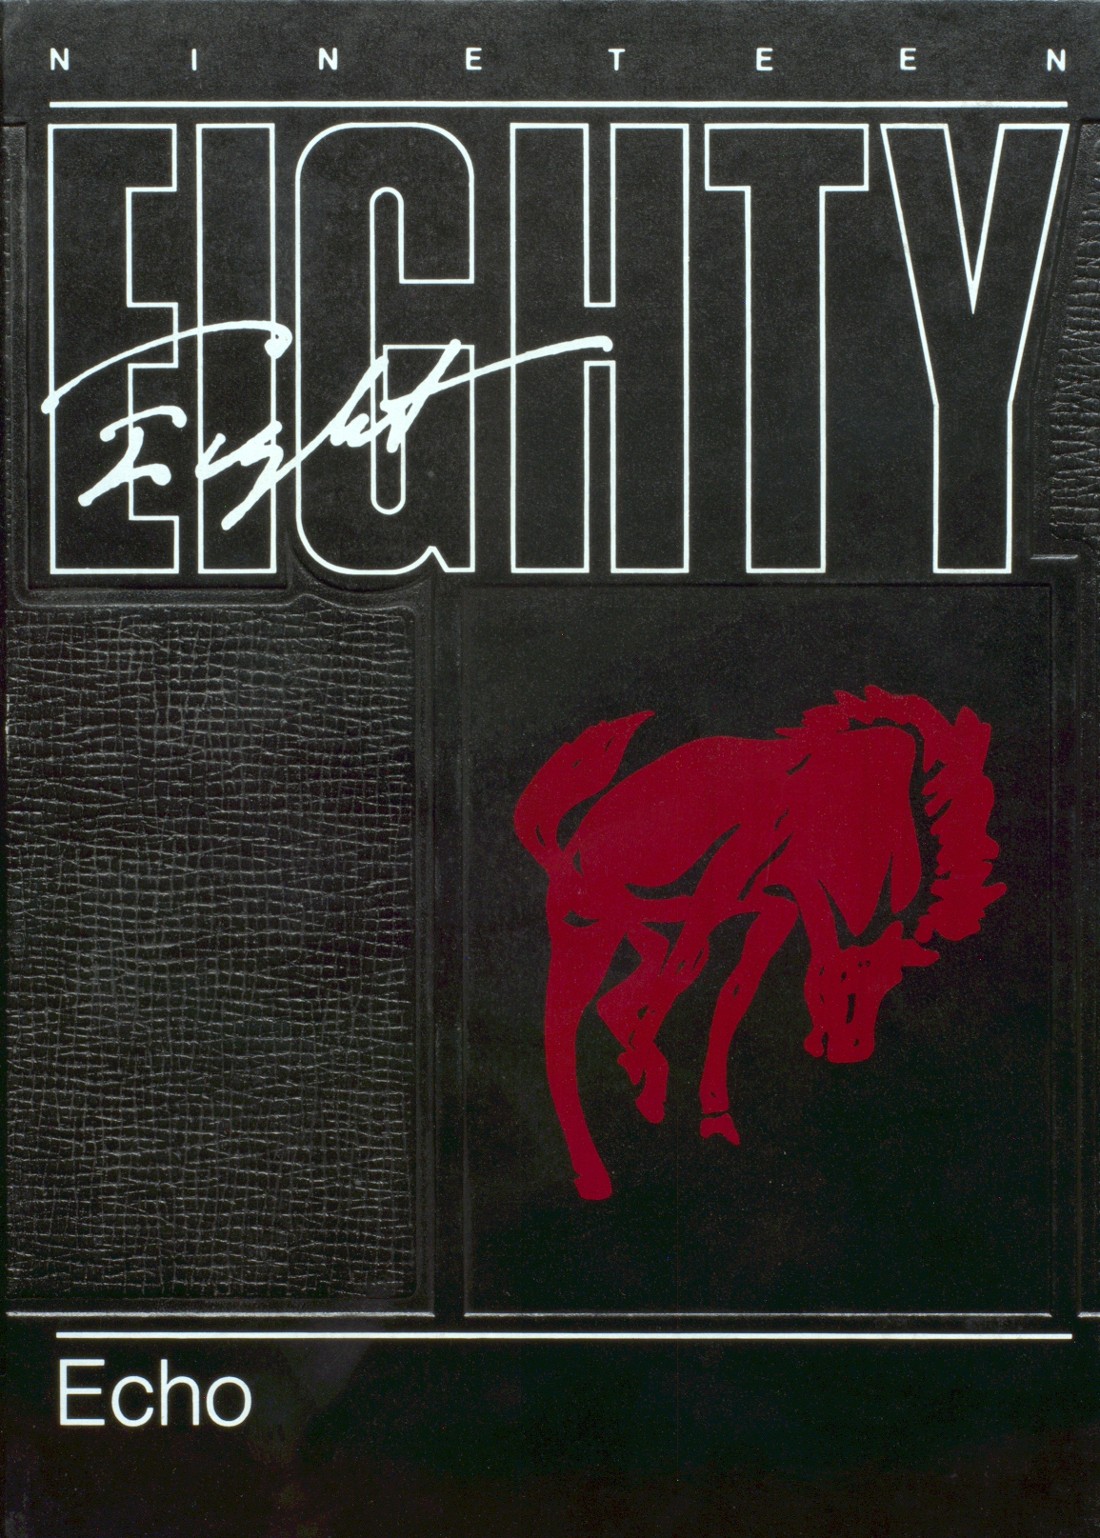 1988 yearbook from Brady High School from West st. paul, Minnesota for sale